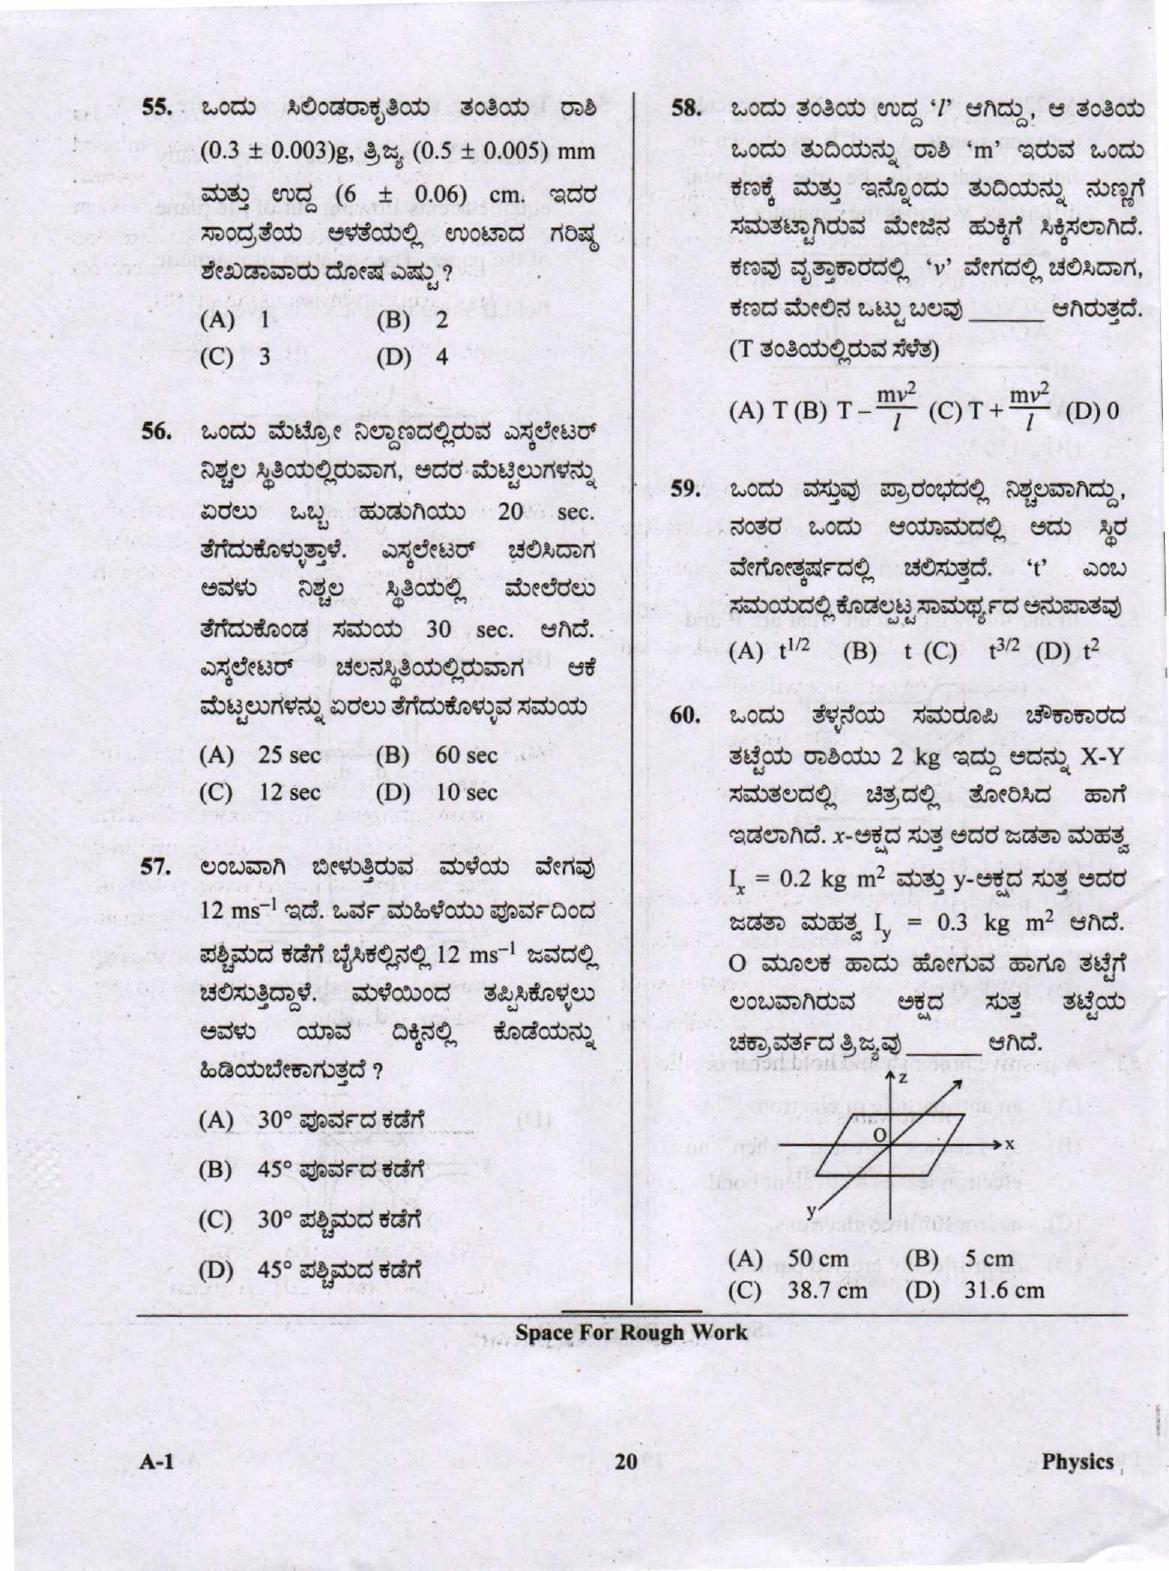 KCET Physics 2020 Question Papers - Page 20